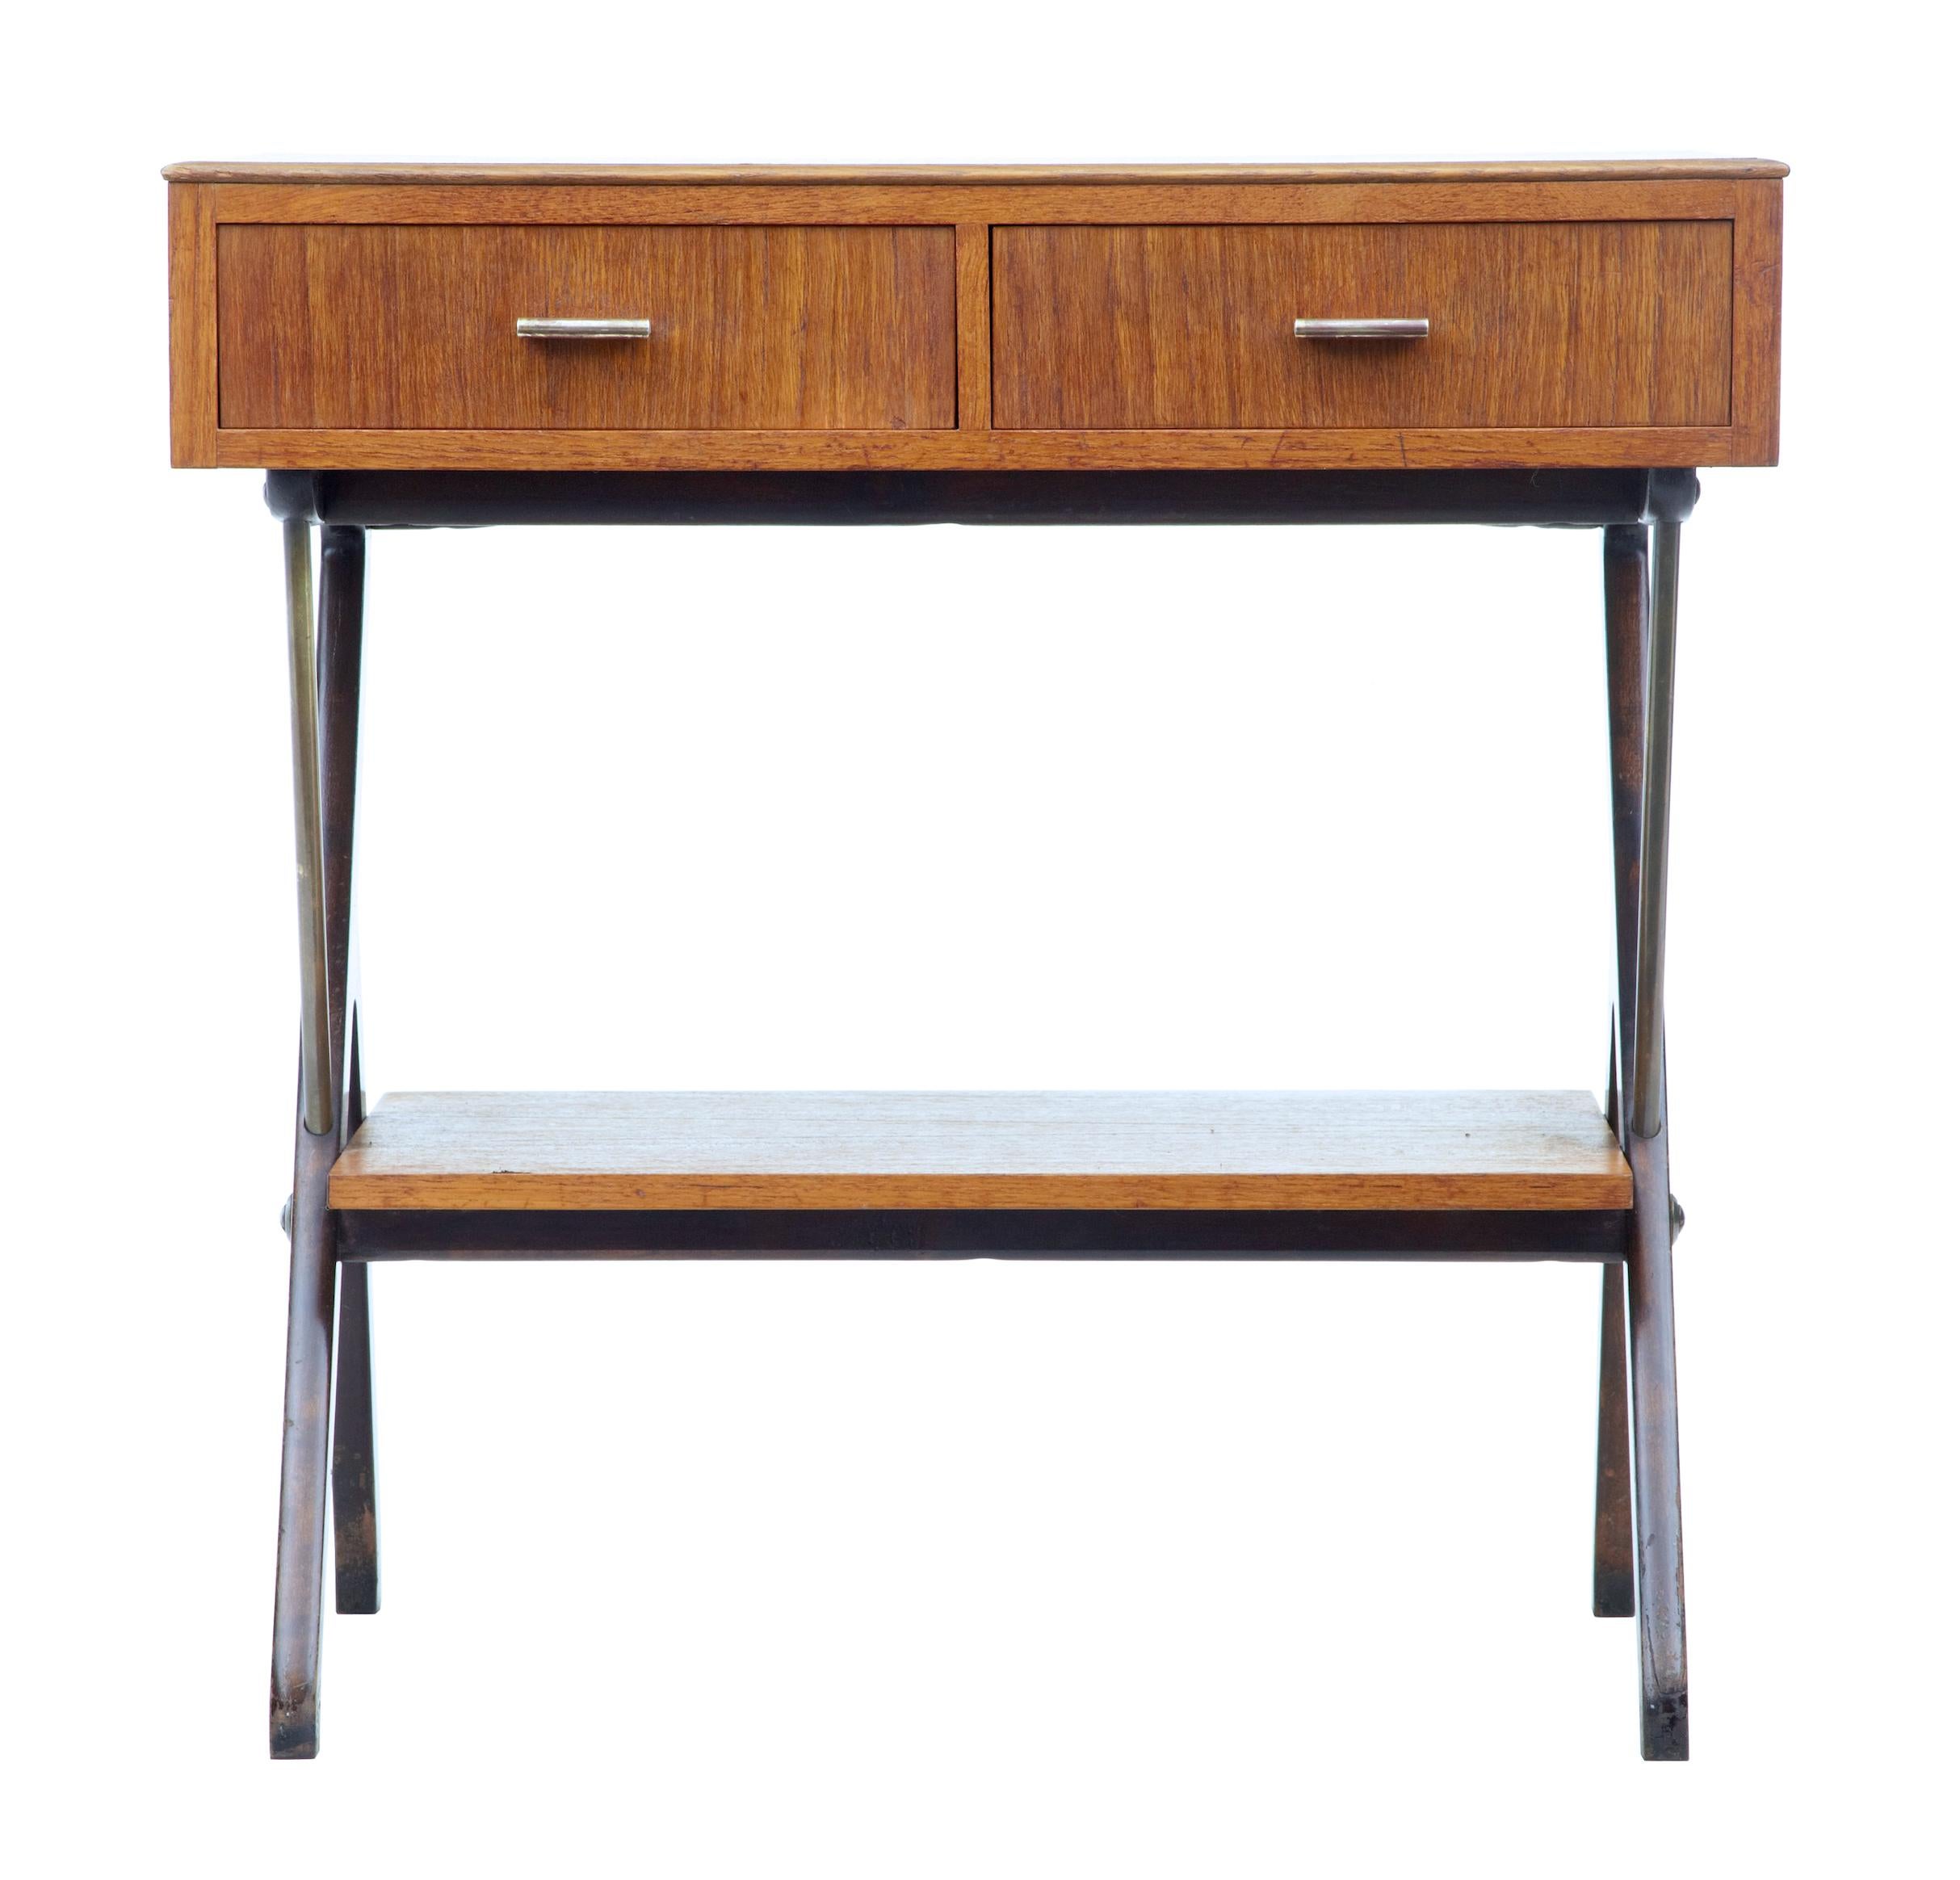 Mid-20th century Scandinavian Modern teak side table, circa 1960.

Teak side table with 2 front drawers. Formica inlaid top and dark stained standing on y frame legs which supports a further storage shelf.

Minor surface marks.